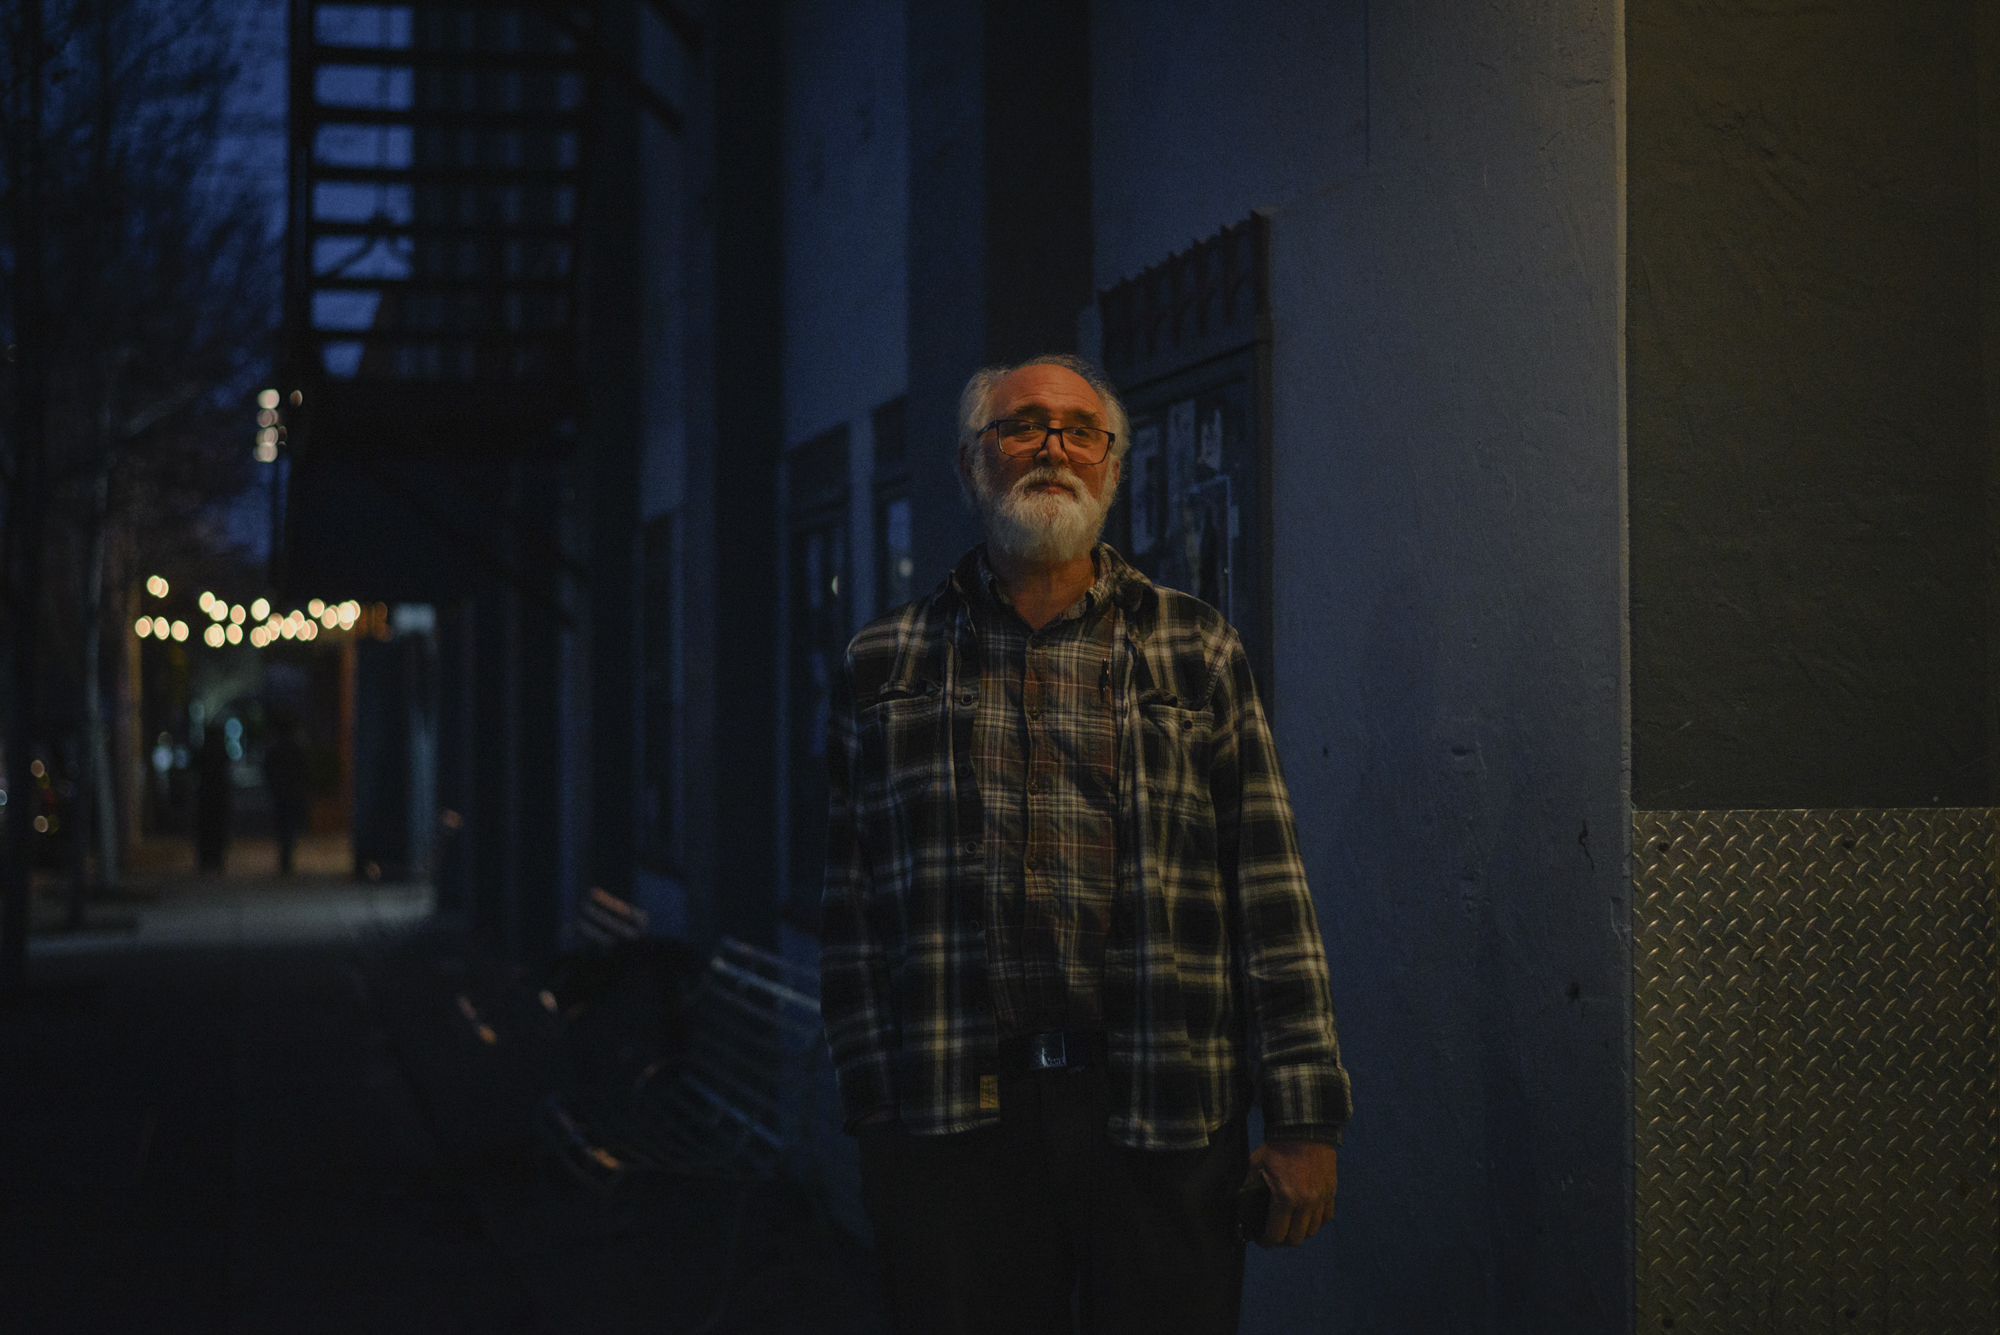 A partly bald man with a white beard stands on a darkened sidewalk and looks at the camera.